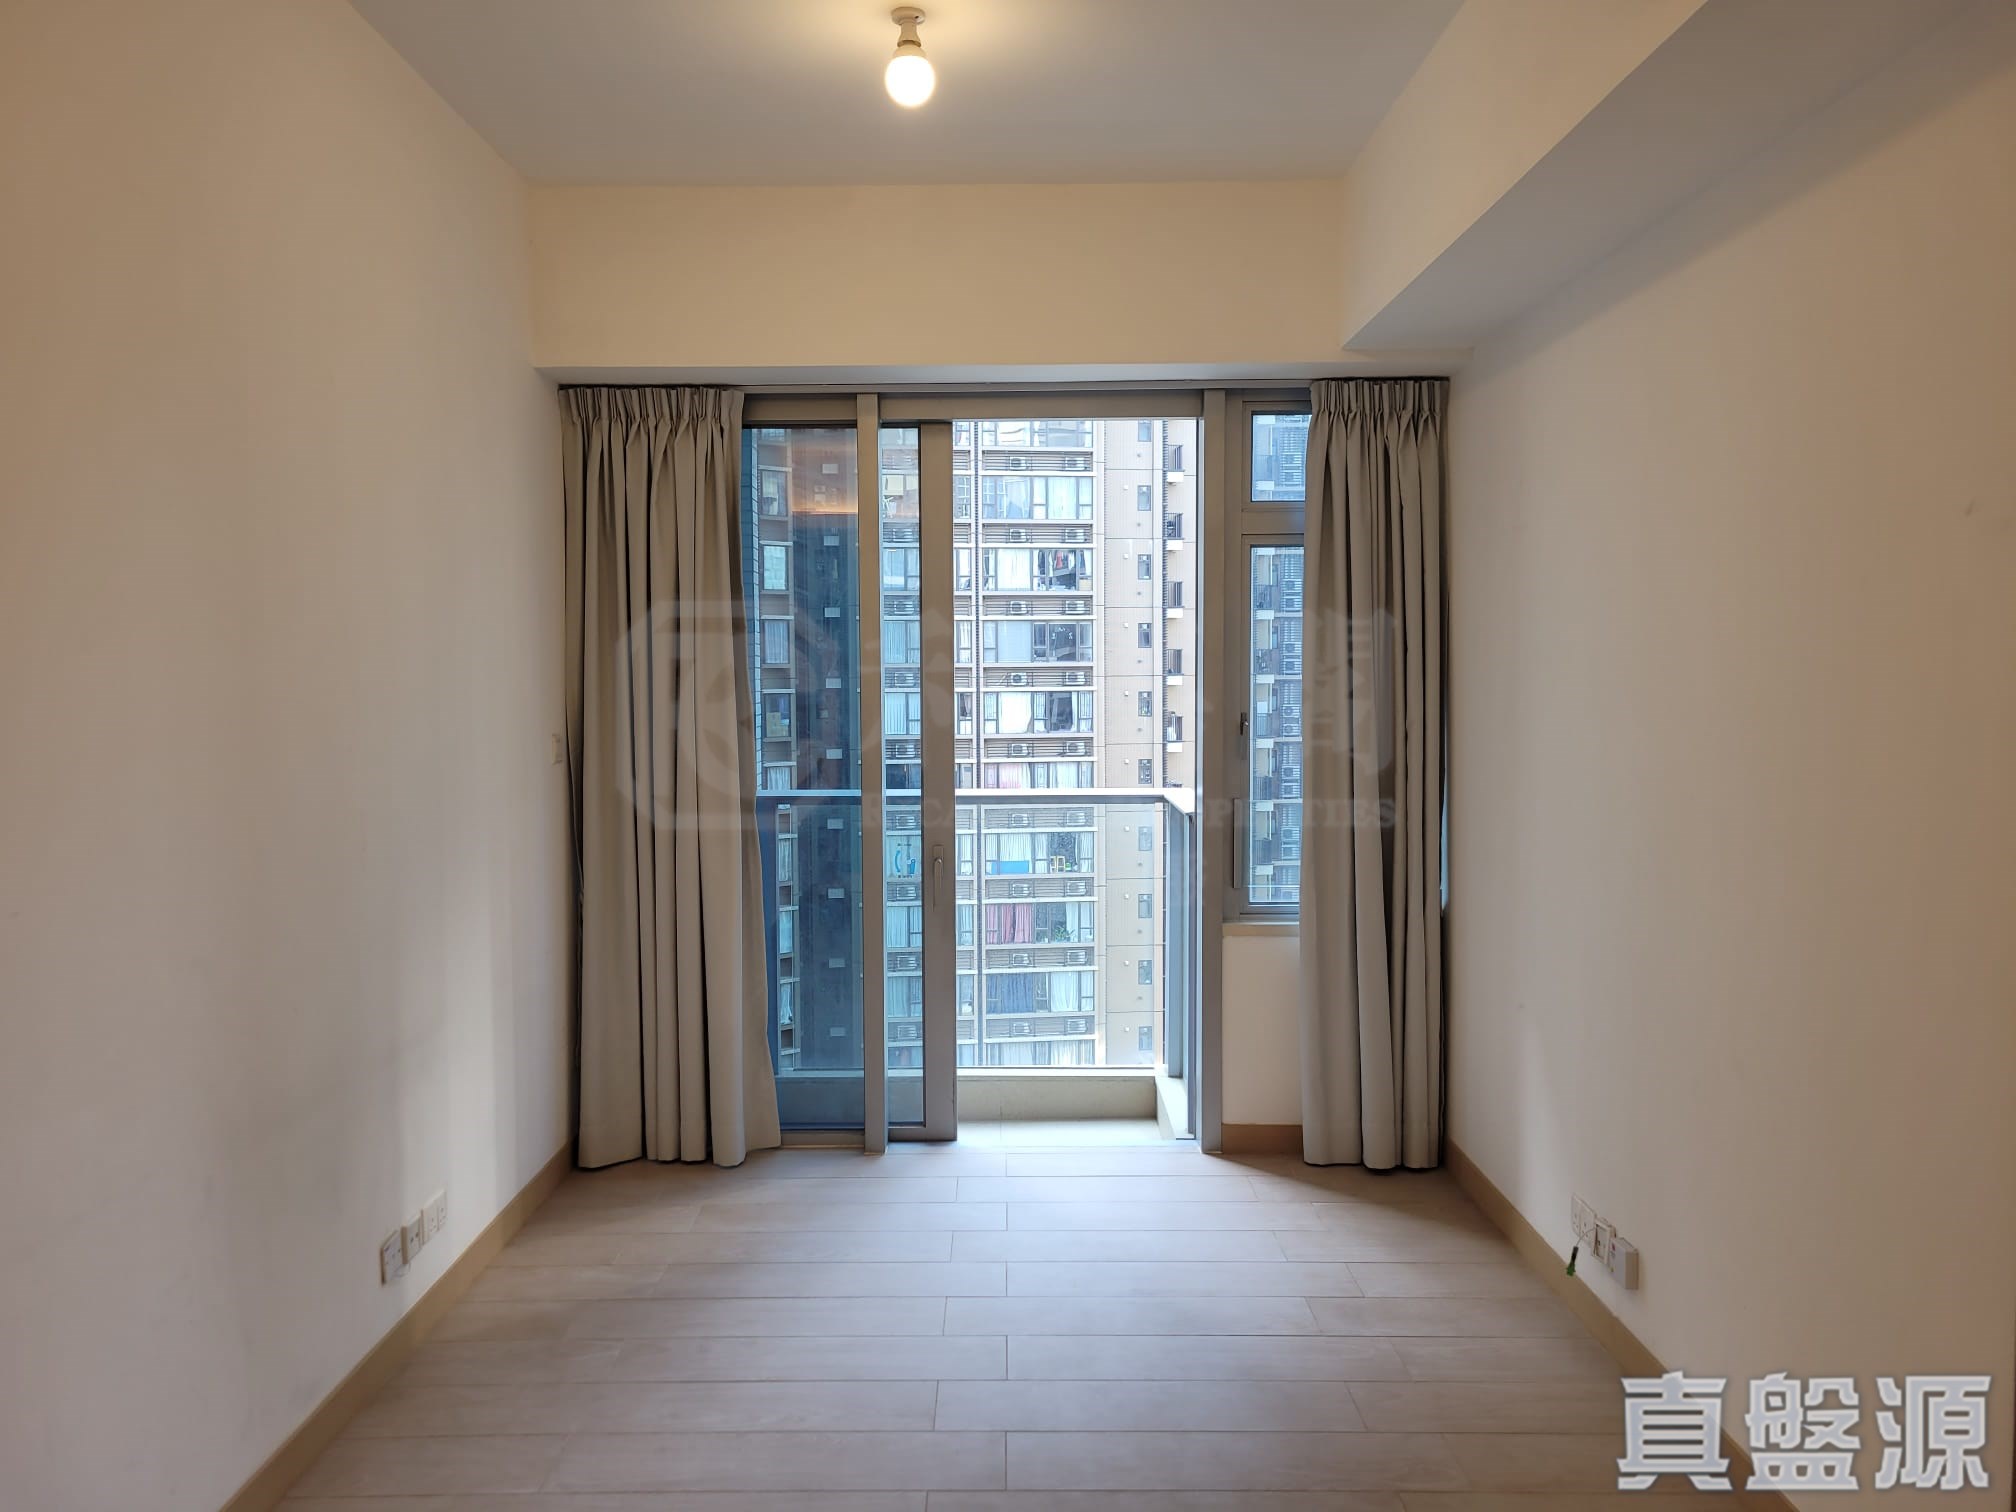 【RC GINNY】1 BR IN CENTURY LINK